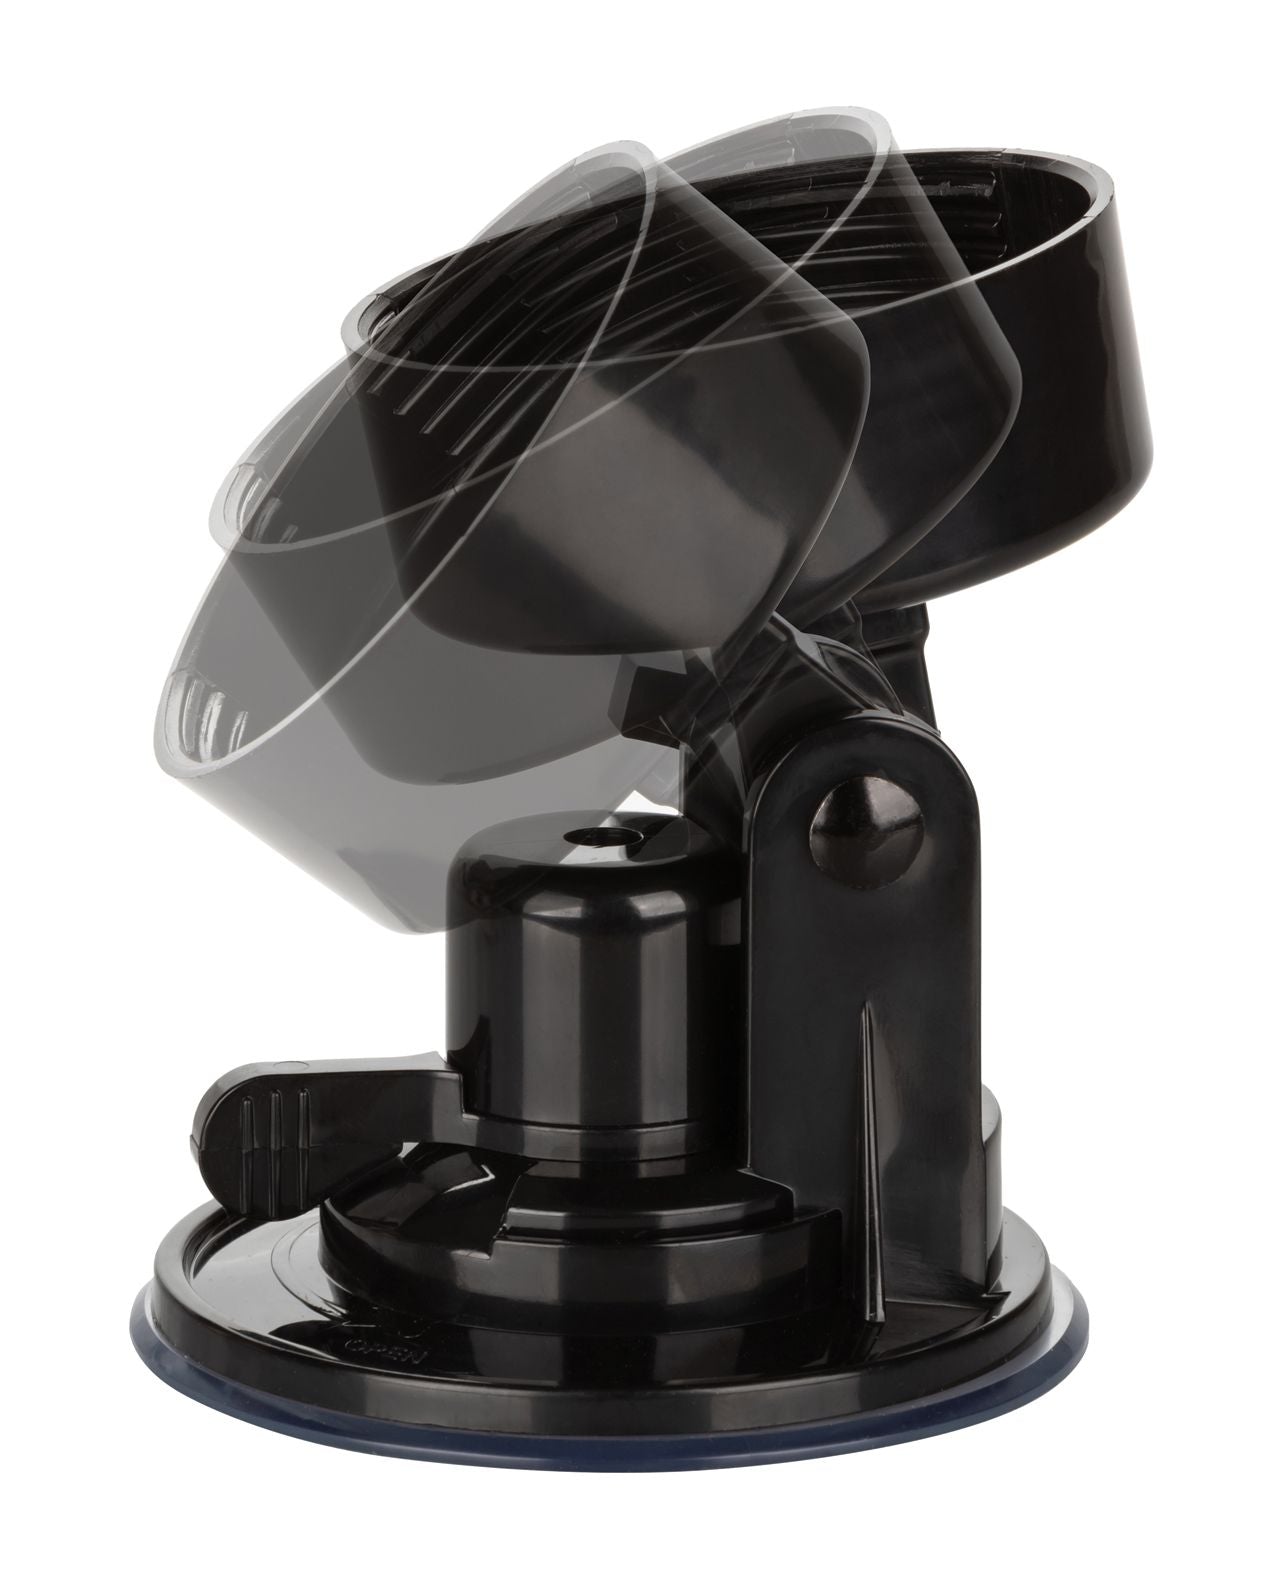 Private Suction Base Accessory - Black Shipmysextoys